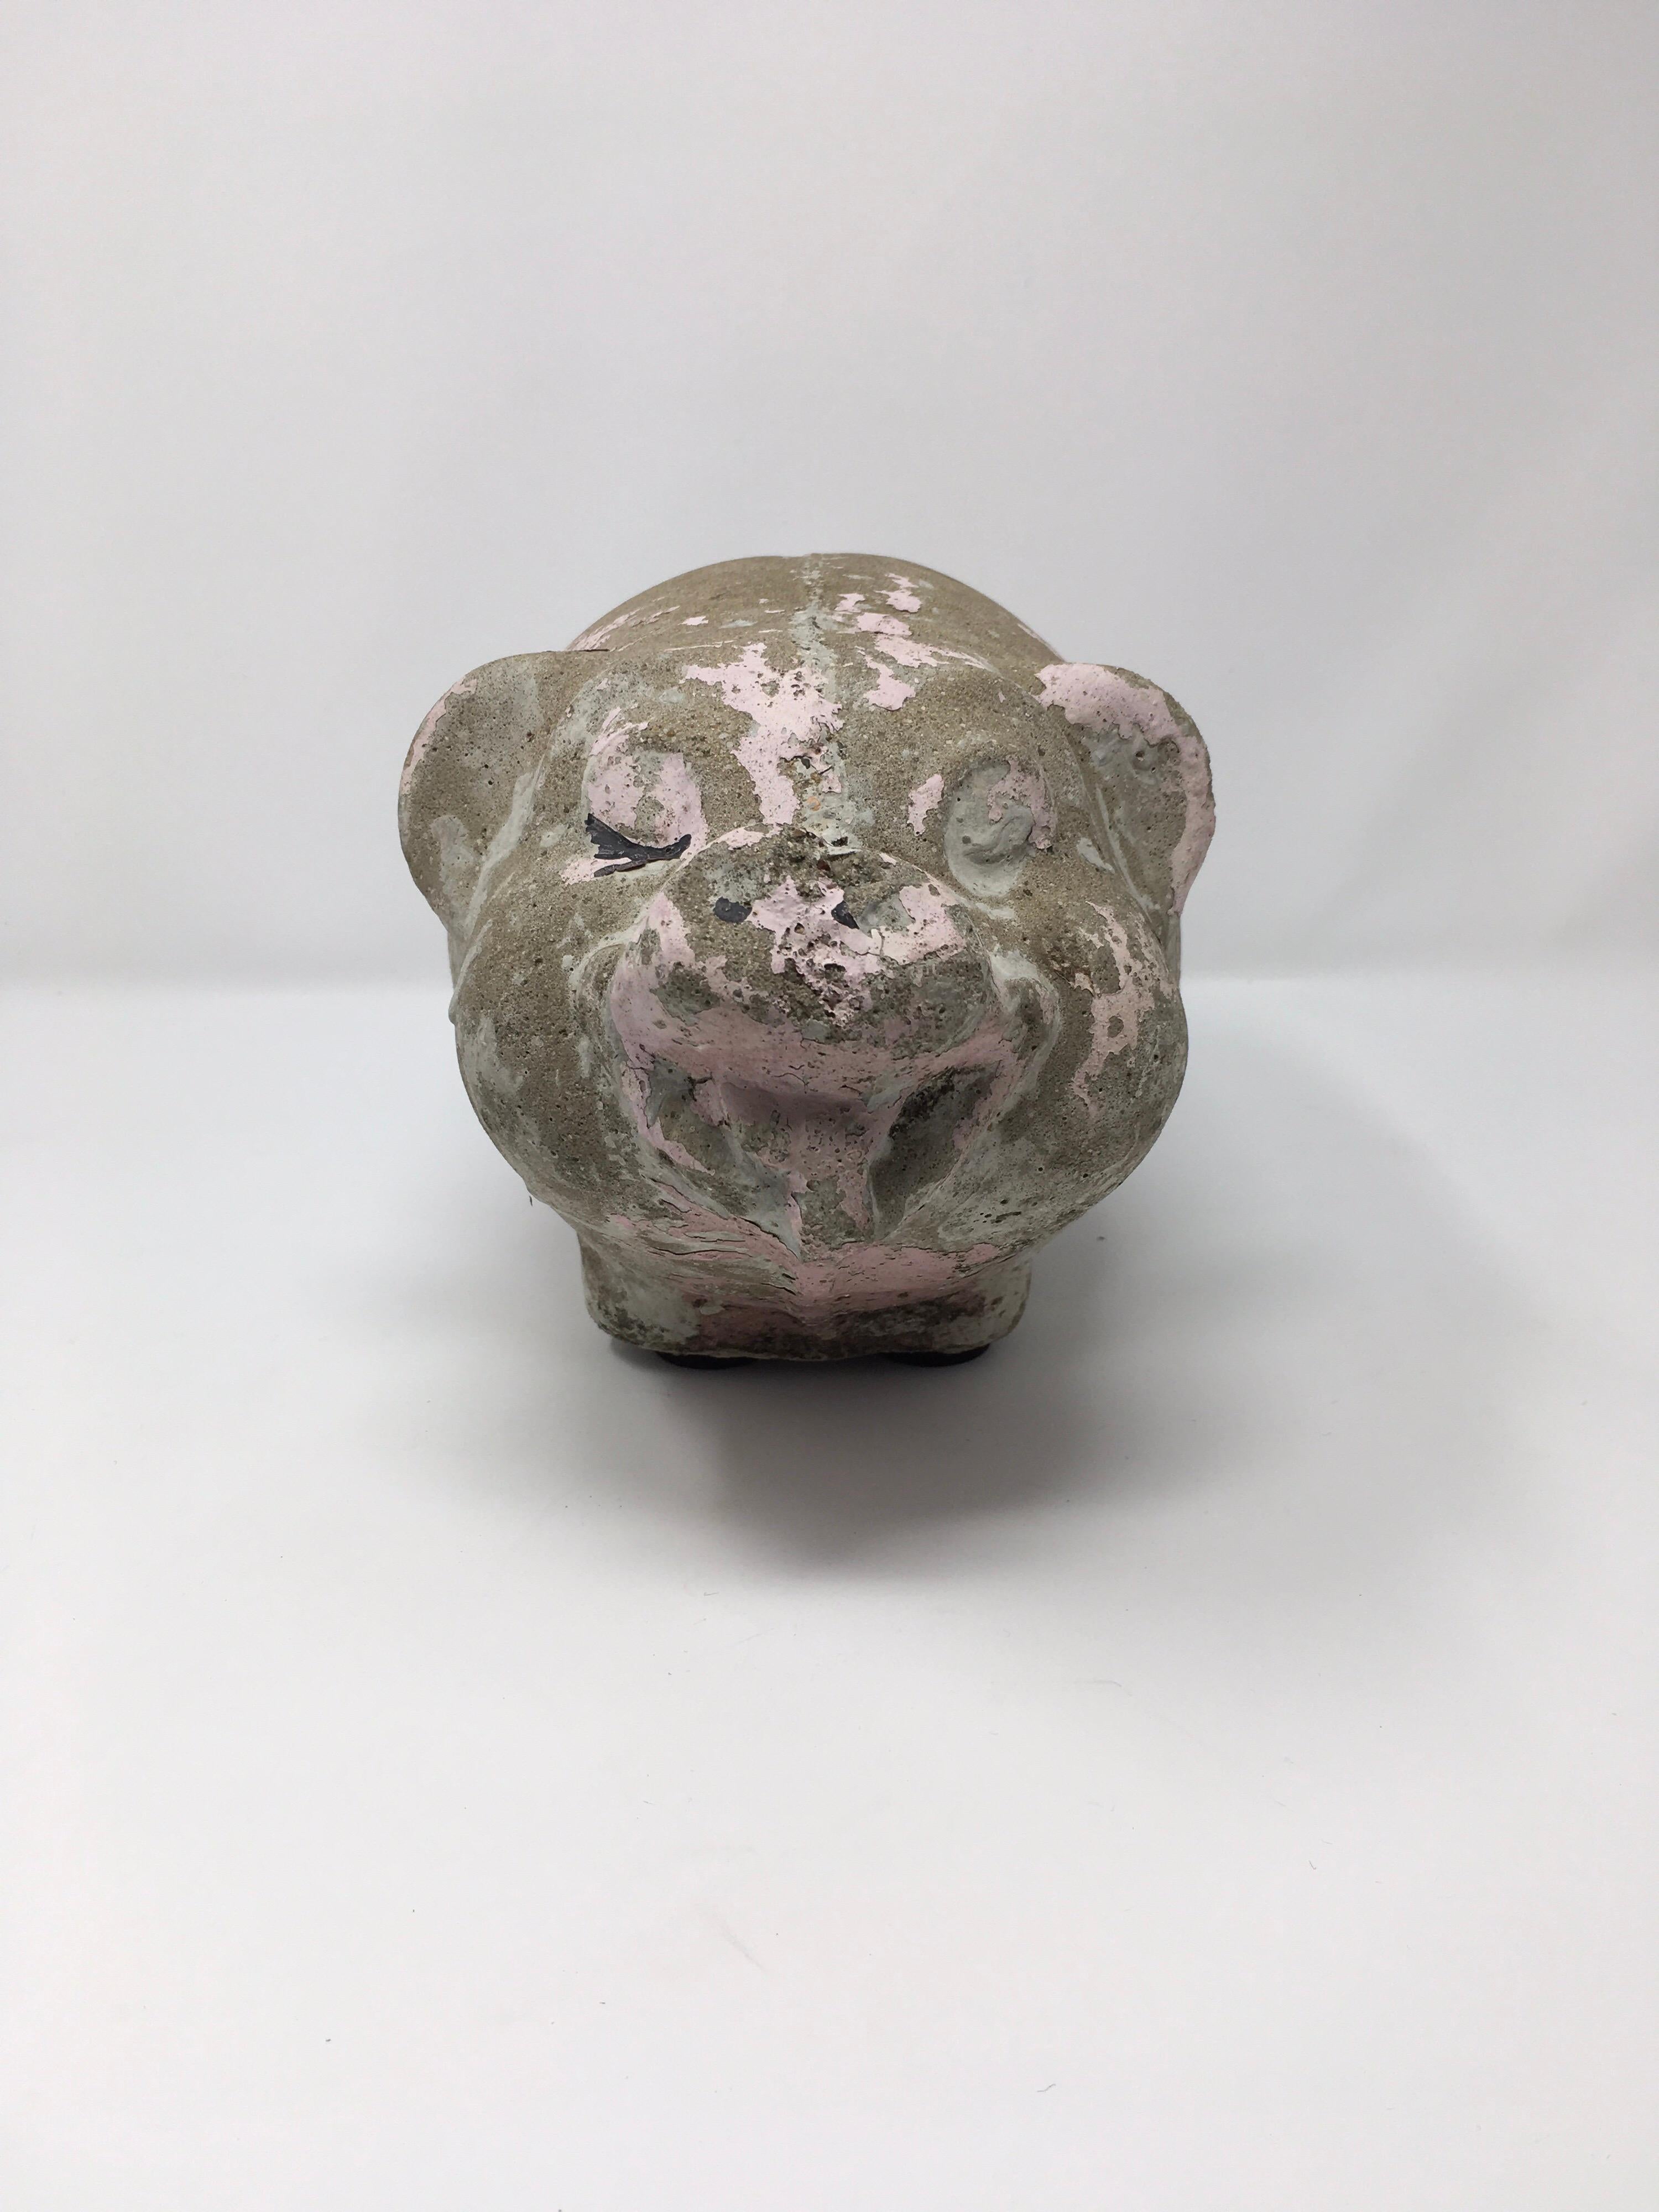 This adorable concrete pig would look great in your garden or indoors. Once painted pink, the paint has worn to a beautiful aged and loved patina.